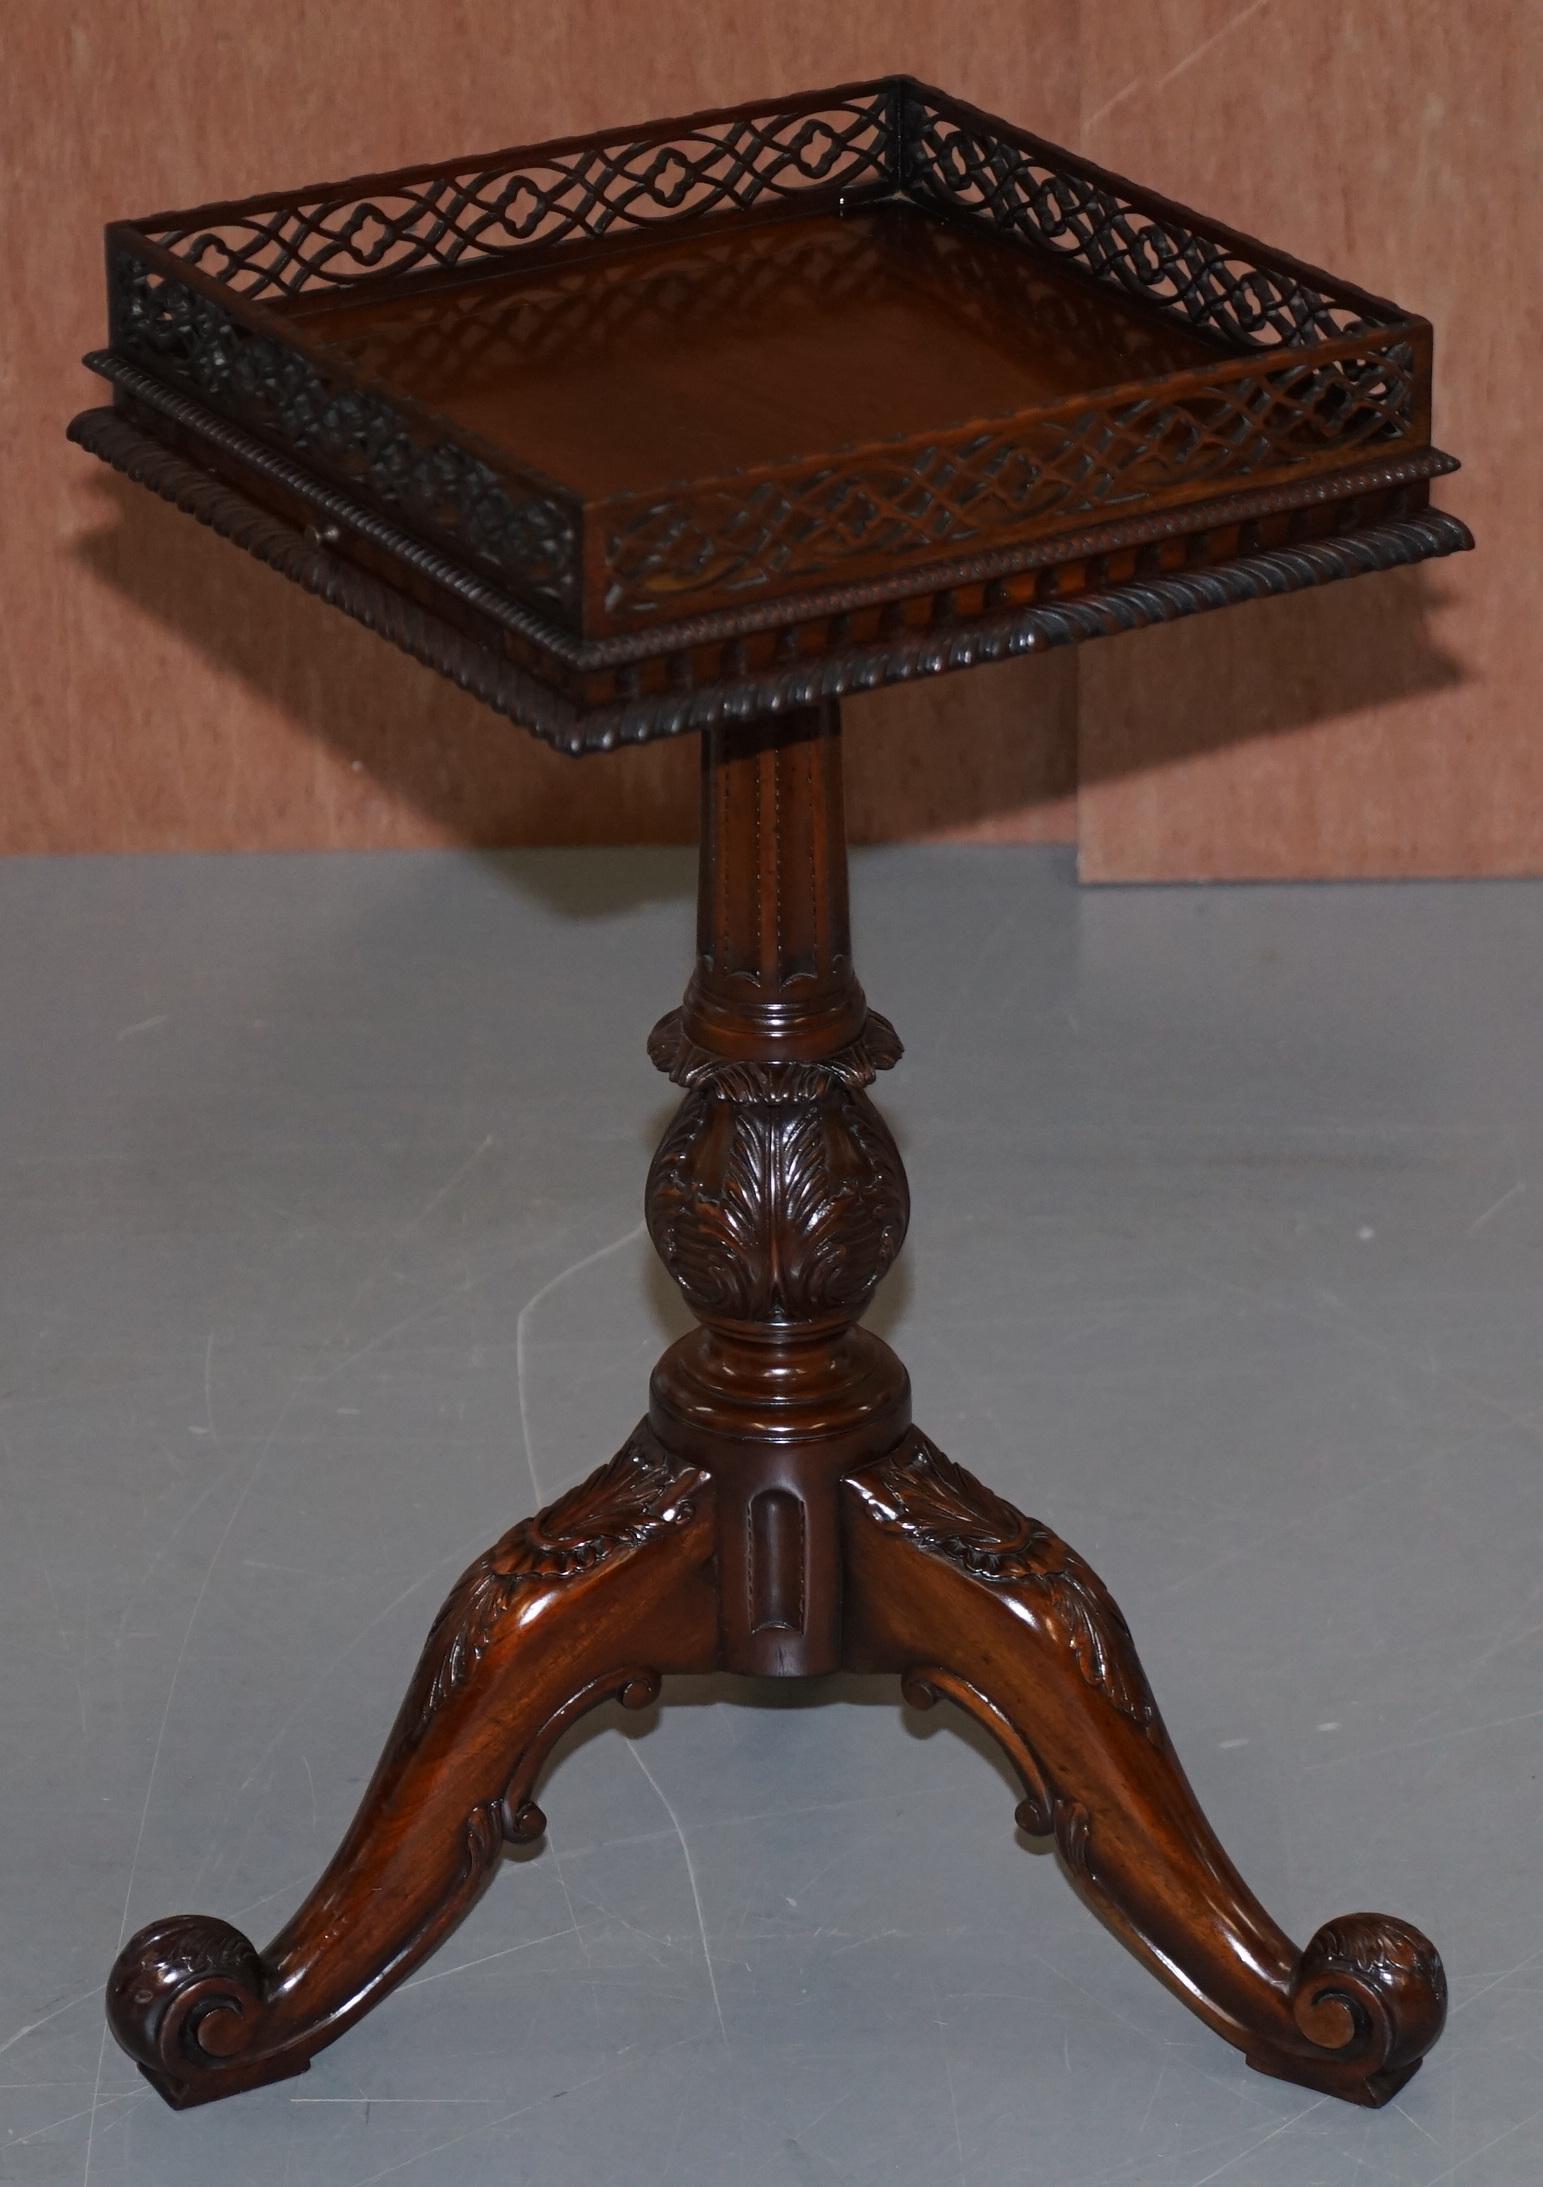 We are delighted to offer for sale this lovely near pair of circa 1900- 1910 Chippendale revival side tables with fretwork carved gallery side rails

A very good looking and well made pair, based on the 18th century Chippendale originals which